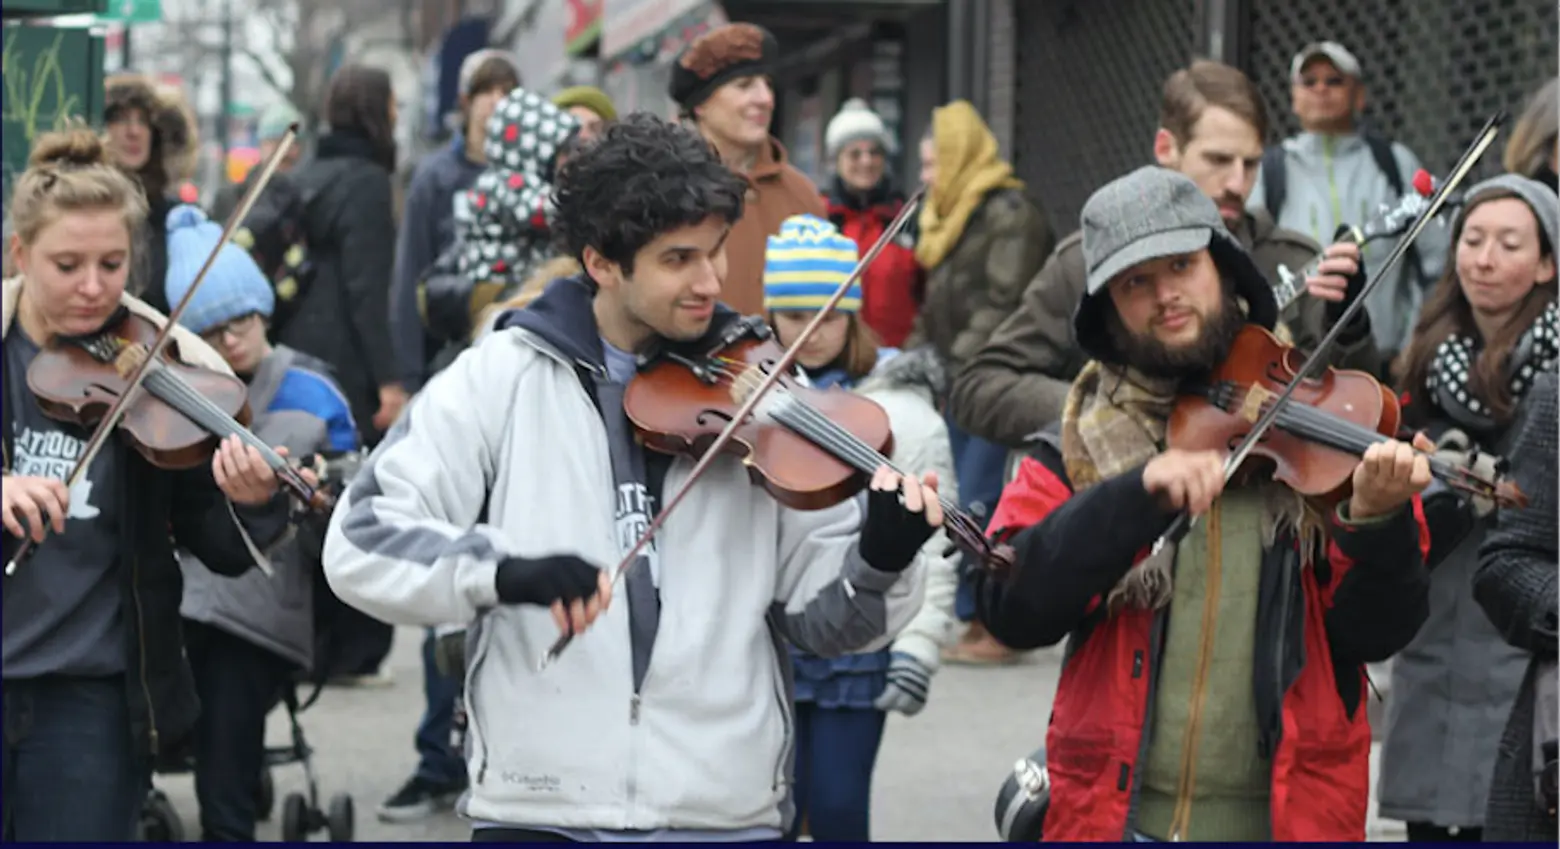 holiday events, holiday, events, wreaths, central park, make music day, make music winter